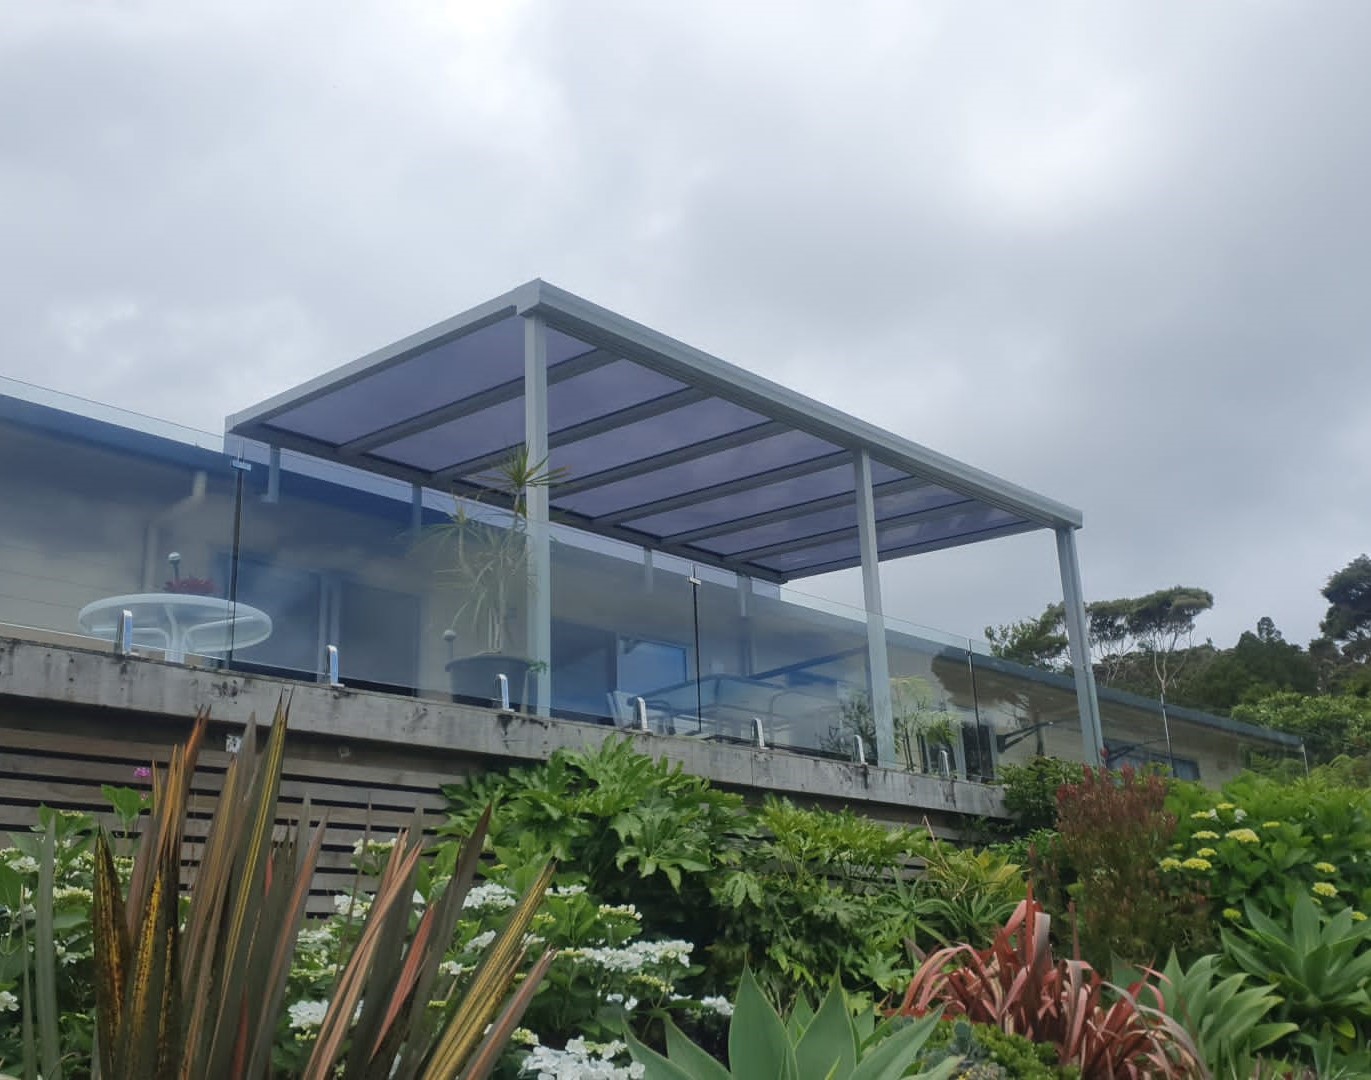 https://canvasandshades.co.nz/outdoor-glazed-roofs-kerikeri-canvas-and-shades/